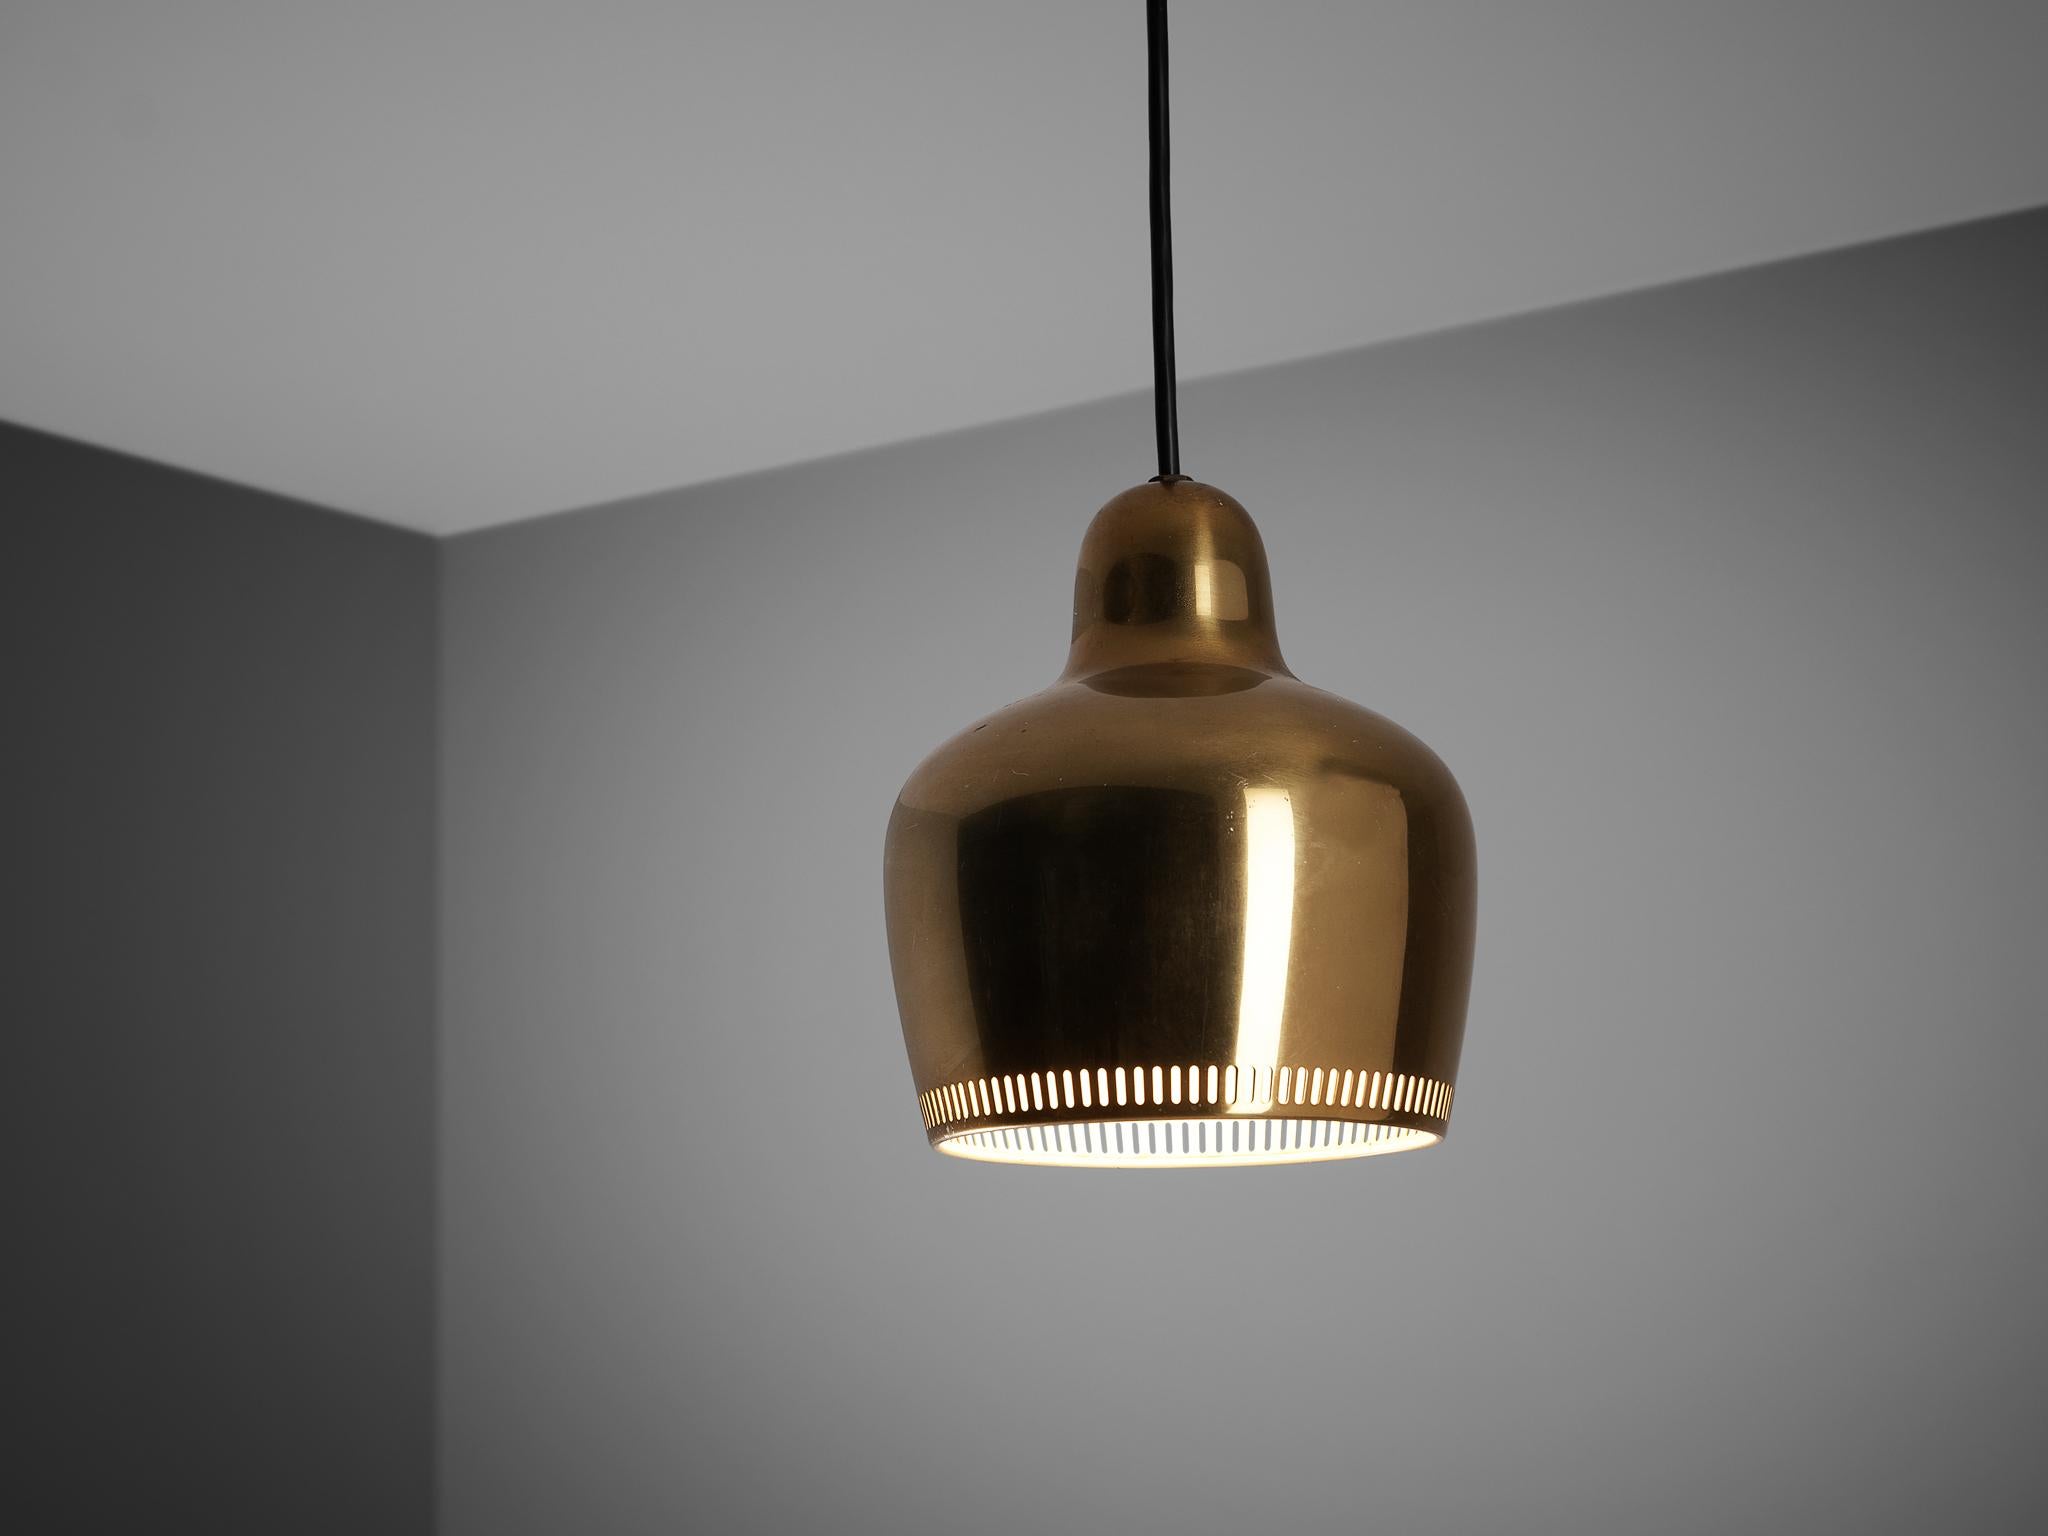 Pendant lamp, brass, Finland, design 1936.

A brass pendant designed by Finnish designer and architect Alvar Aalto and manufactured by Artek. This specific 'Golden Bell' pendant lamp was designed for the interior of the Savoy restaurant in